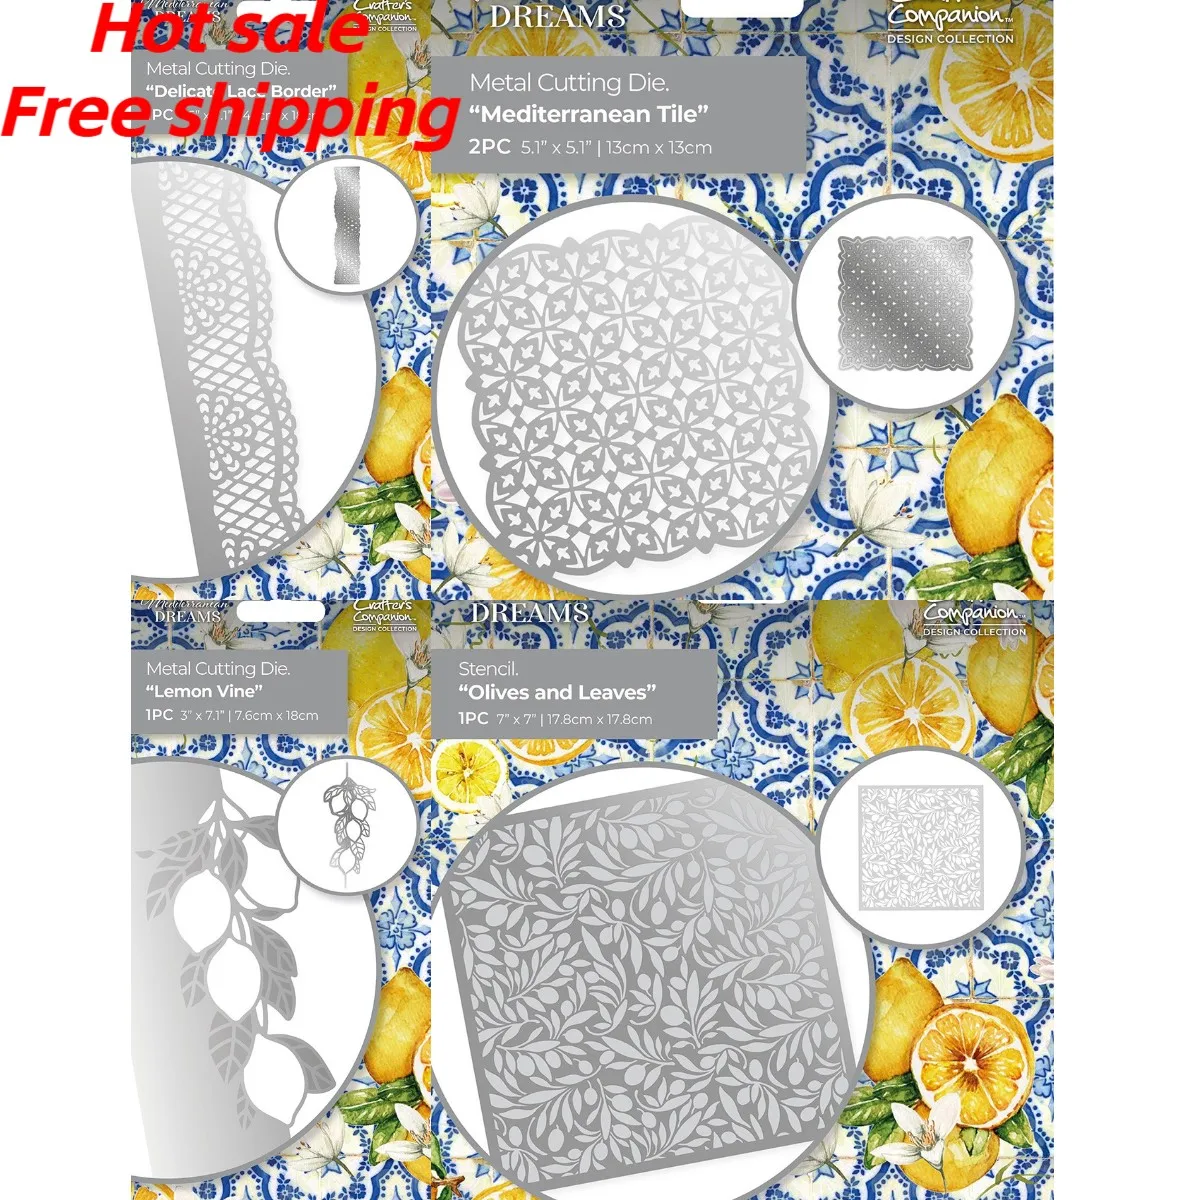 Mediterranean Dreams Olives And Leaves 2023 New Metal Cutting Dies Stencil Craft Embossing Make Paper Greeting Card Making